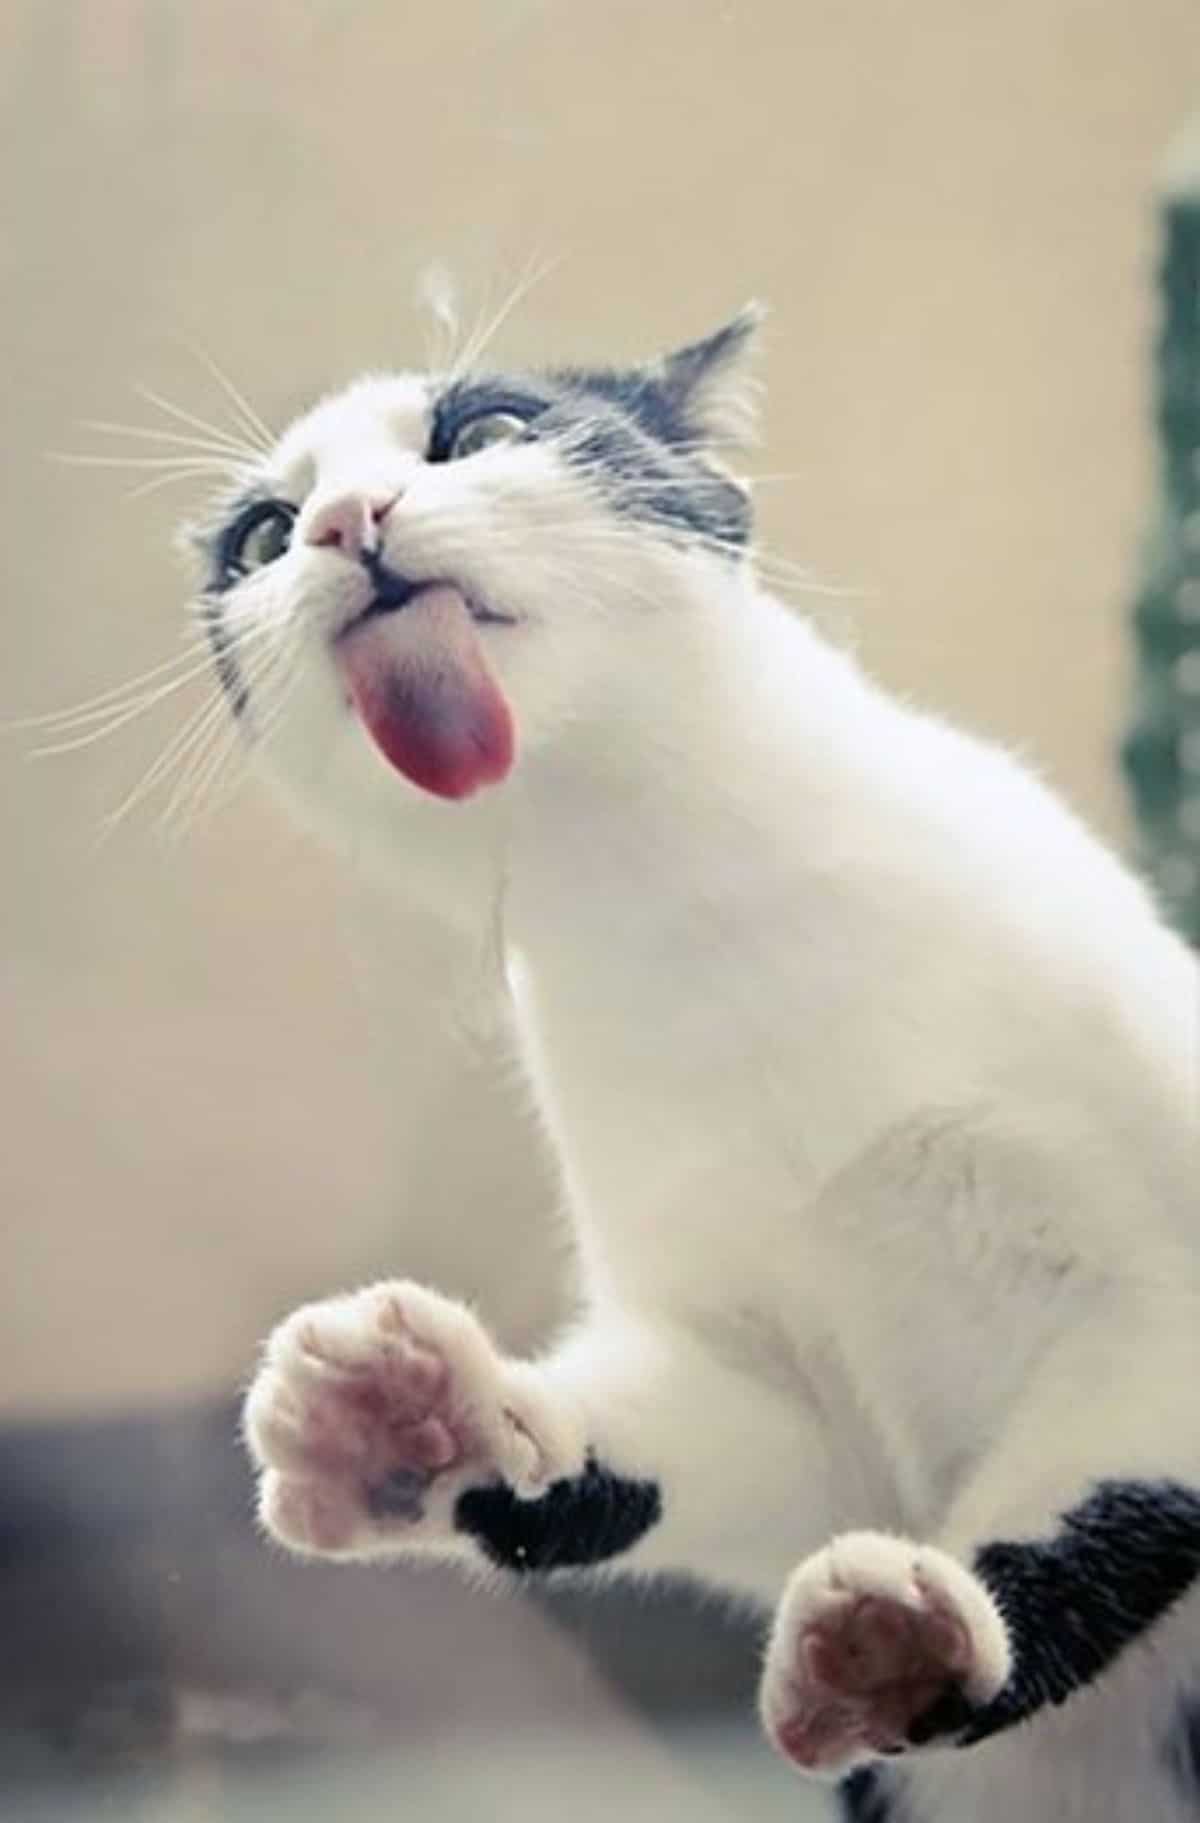 black and white cat standing on a glass and licking it